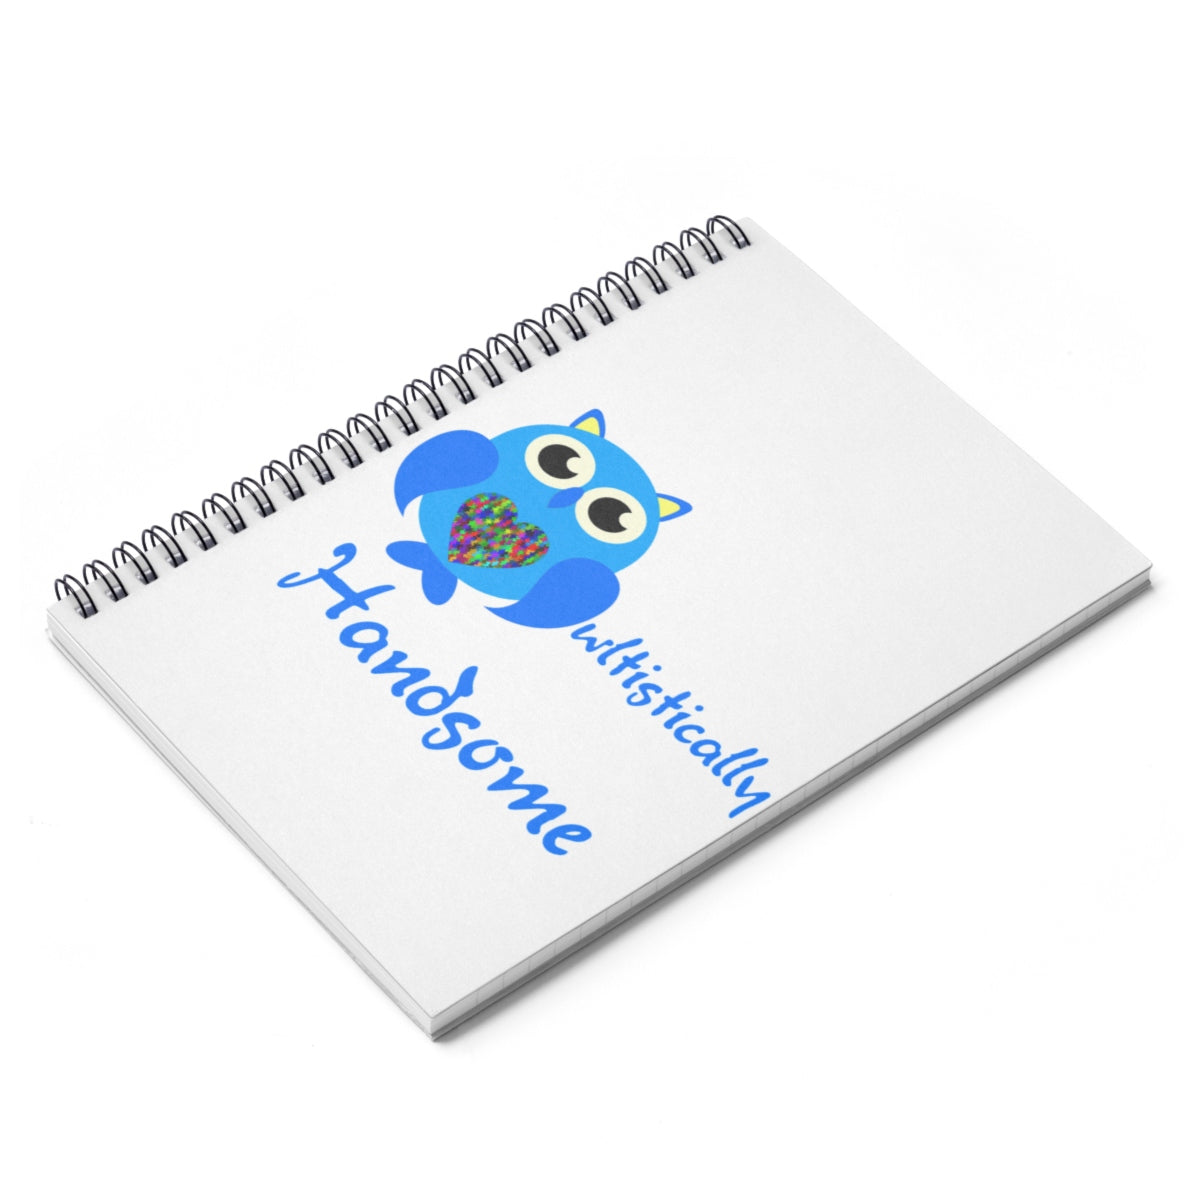 "Owltistically Handsome" Autistic Spiral Notebook - Ruled Line